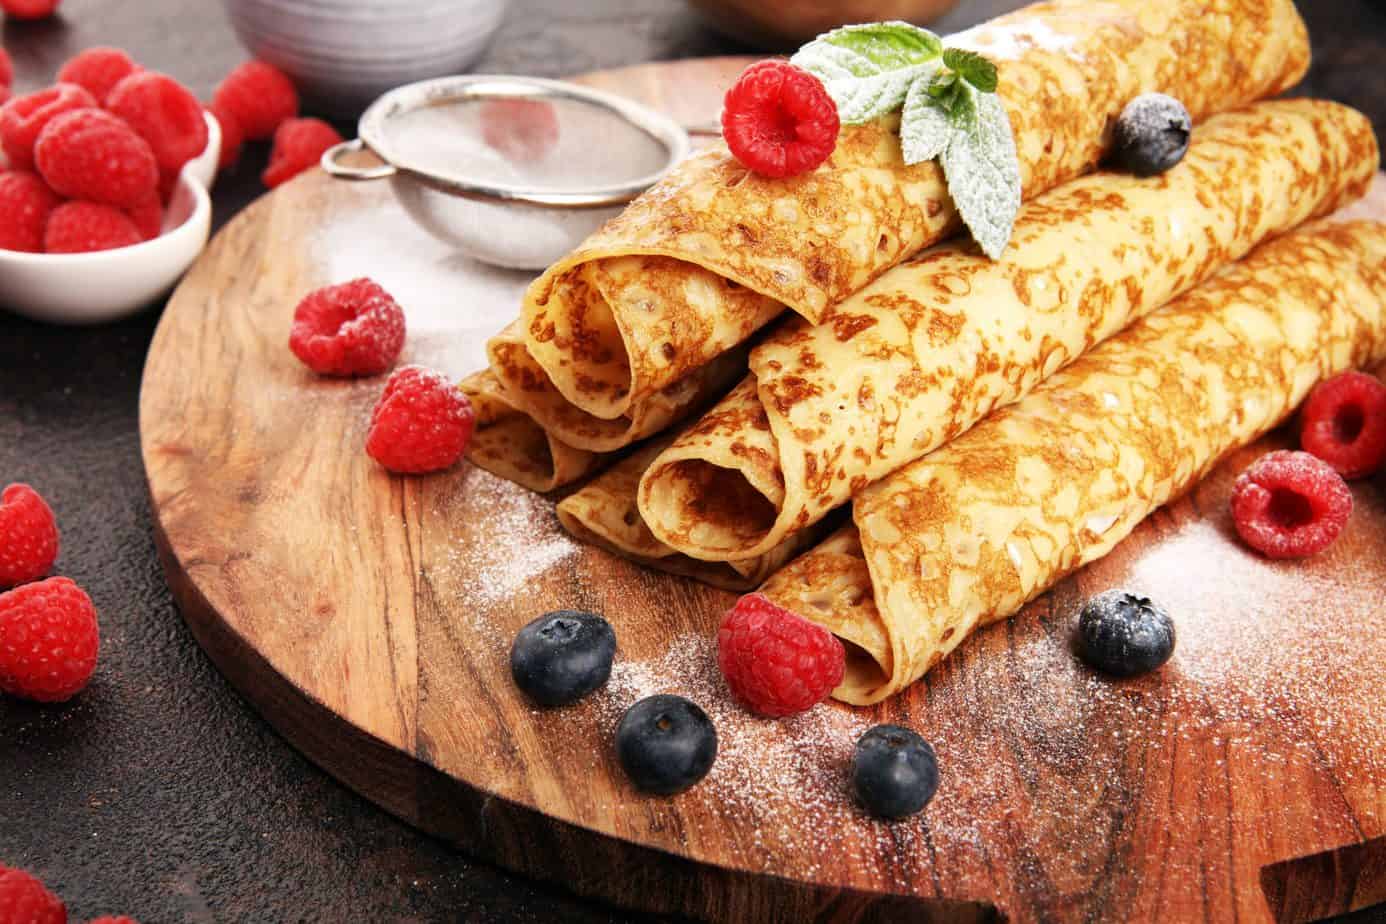 How to make pancakes? Here are the best recipes